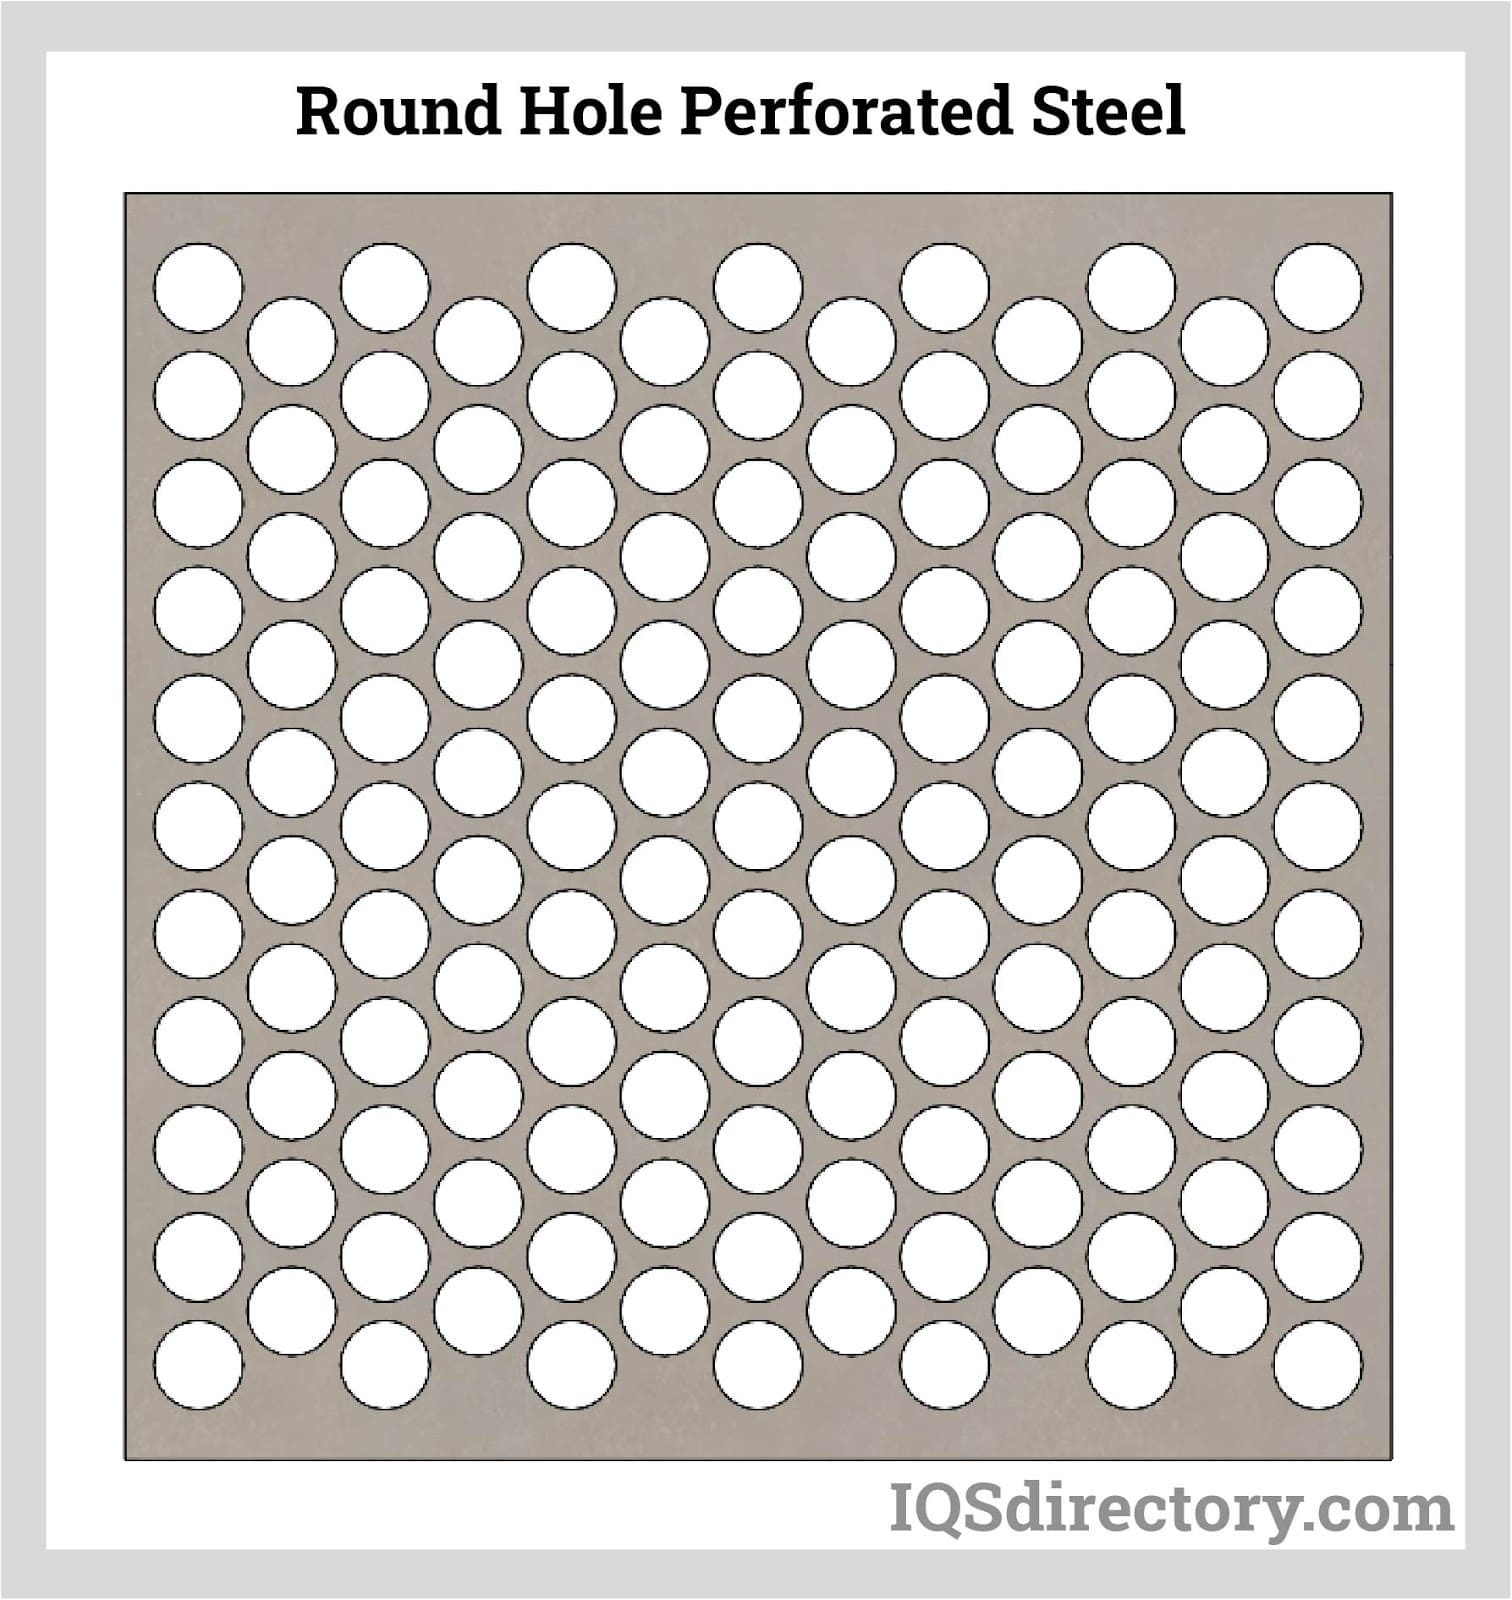 Round Hole Perforated Steel